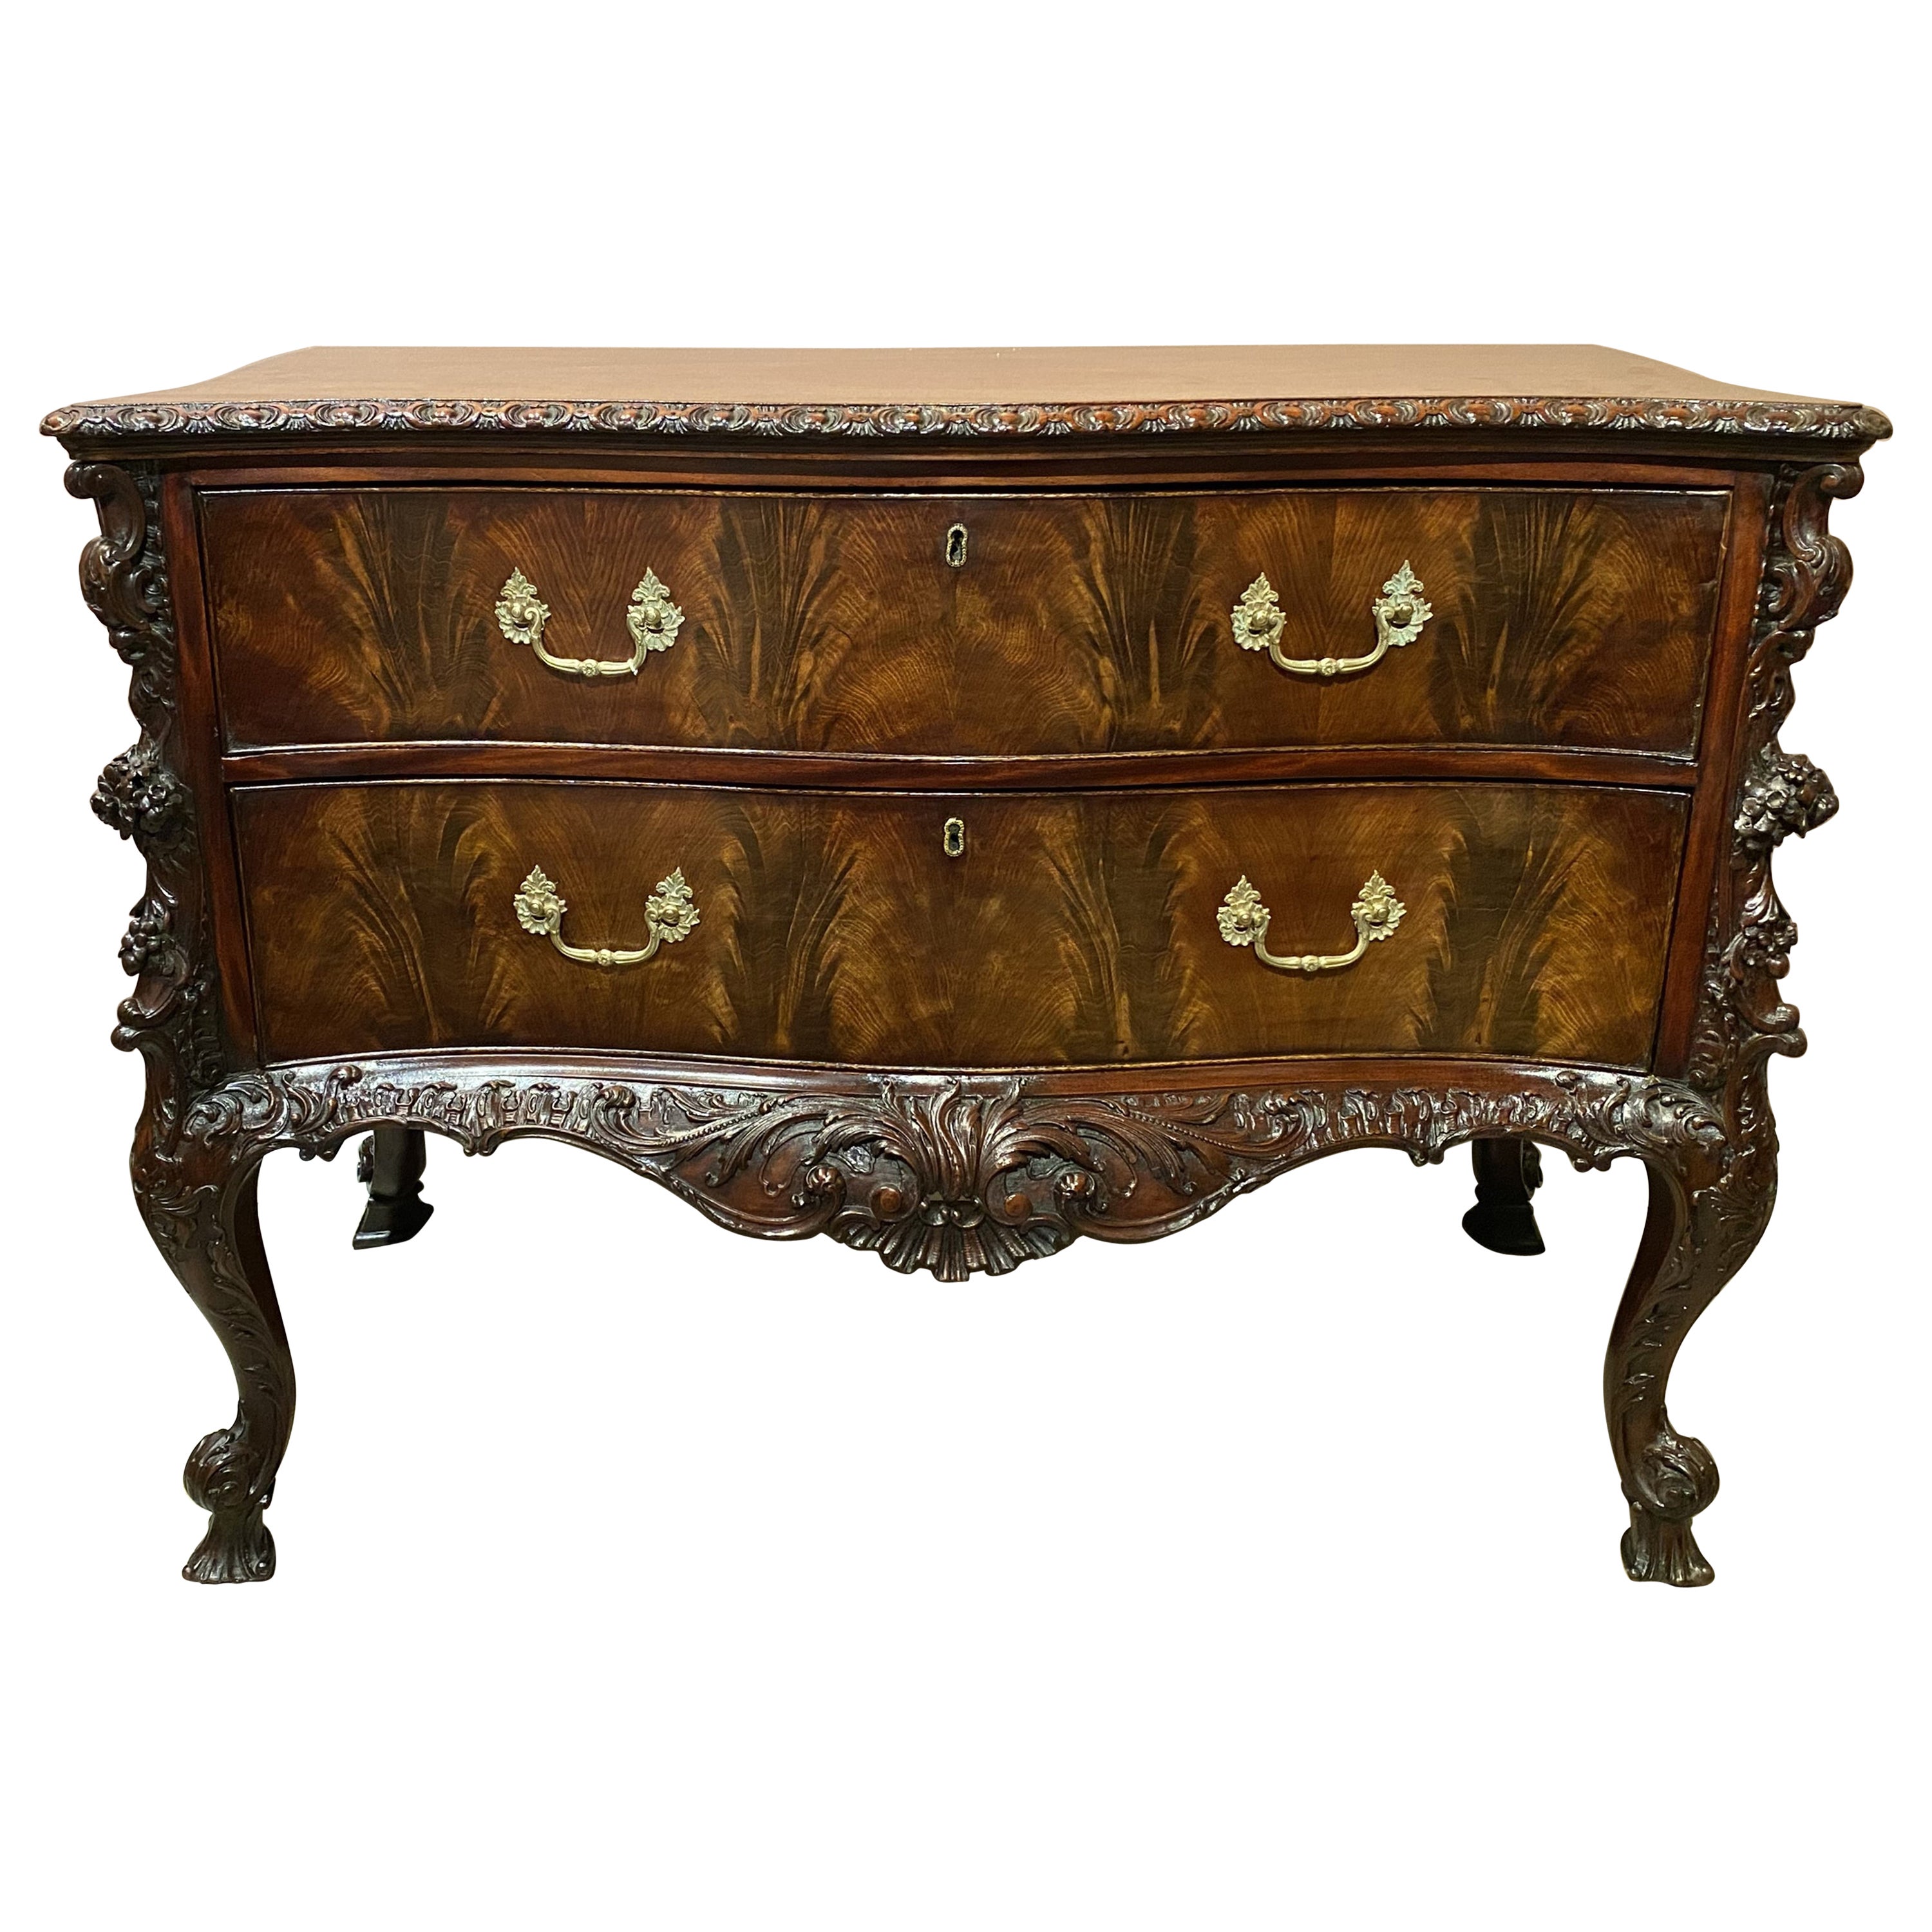 Rococo Revival Mahogany Heavily Carved 2 Drawer Commode in the Chippendale Taste For Sale